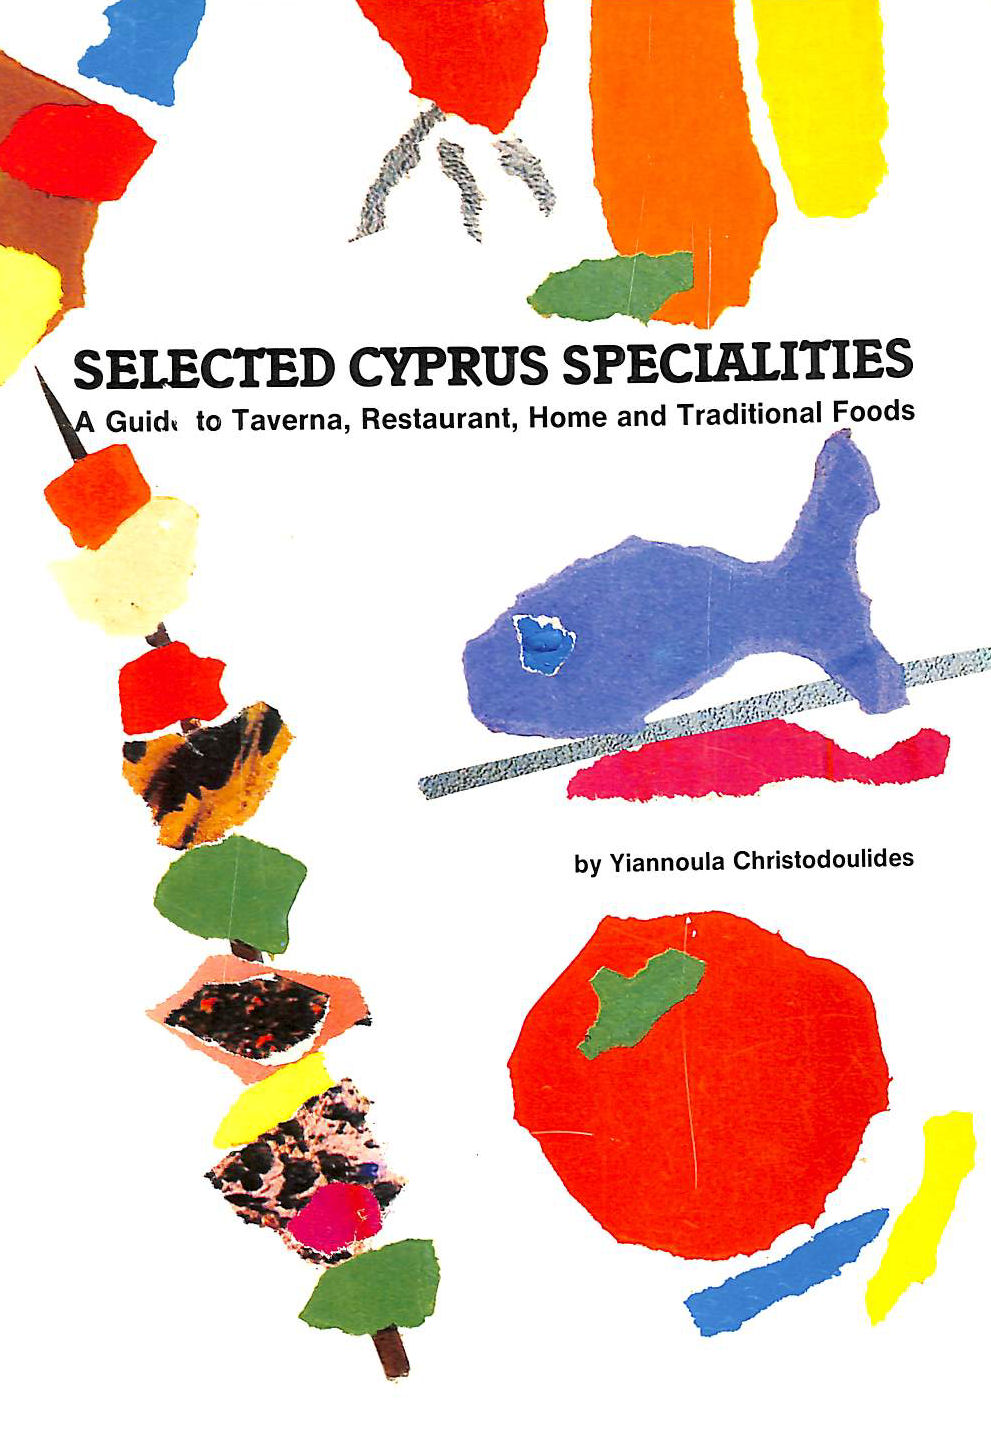 YIANNOULA CHRISTODOULIDES - Selected Cyprus Specialities